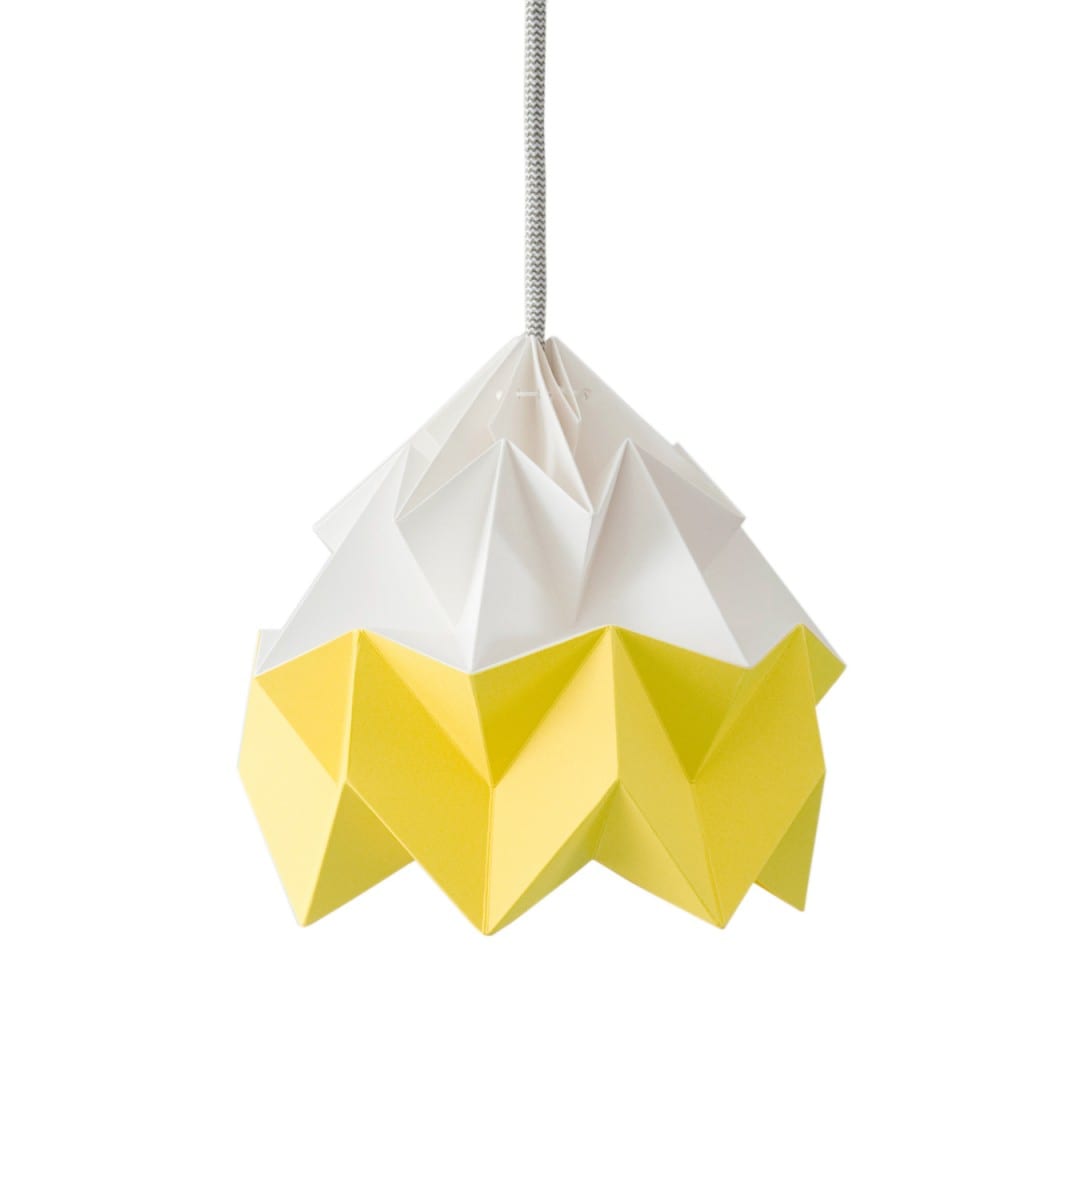 Moth origami lampshade gold yellow and white. © Studio Snowpuppe